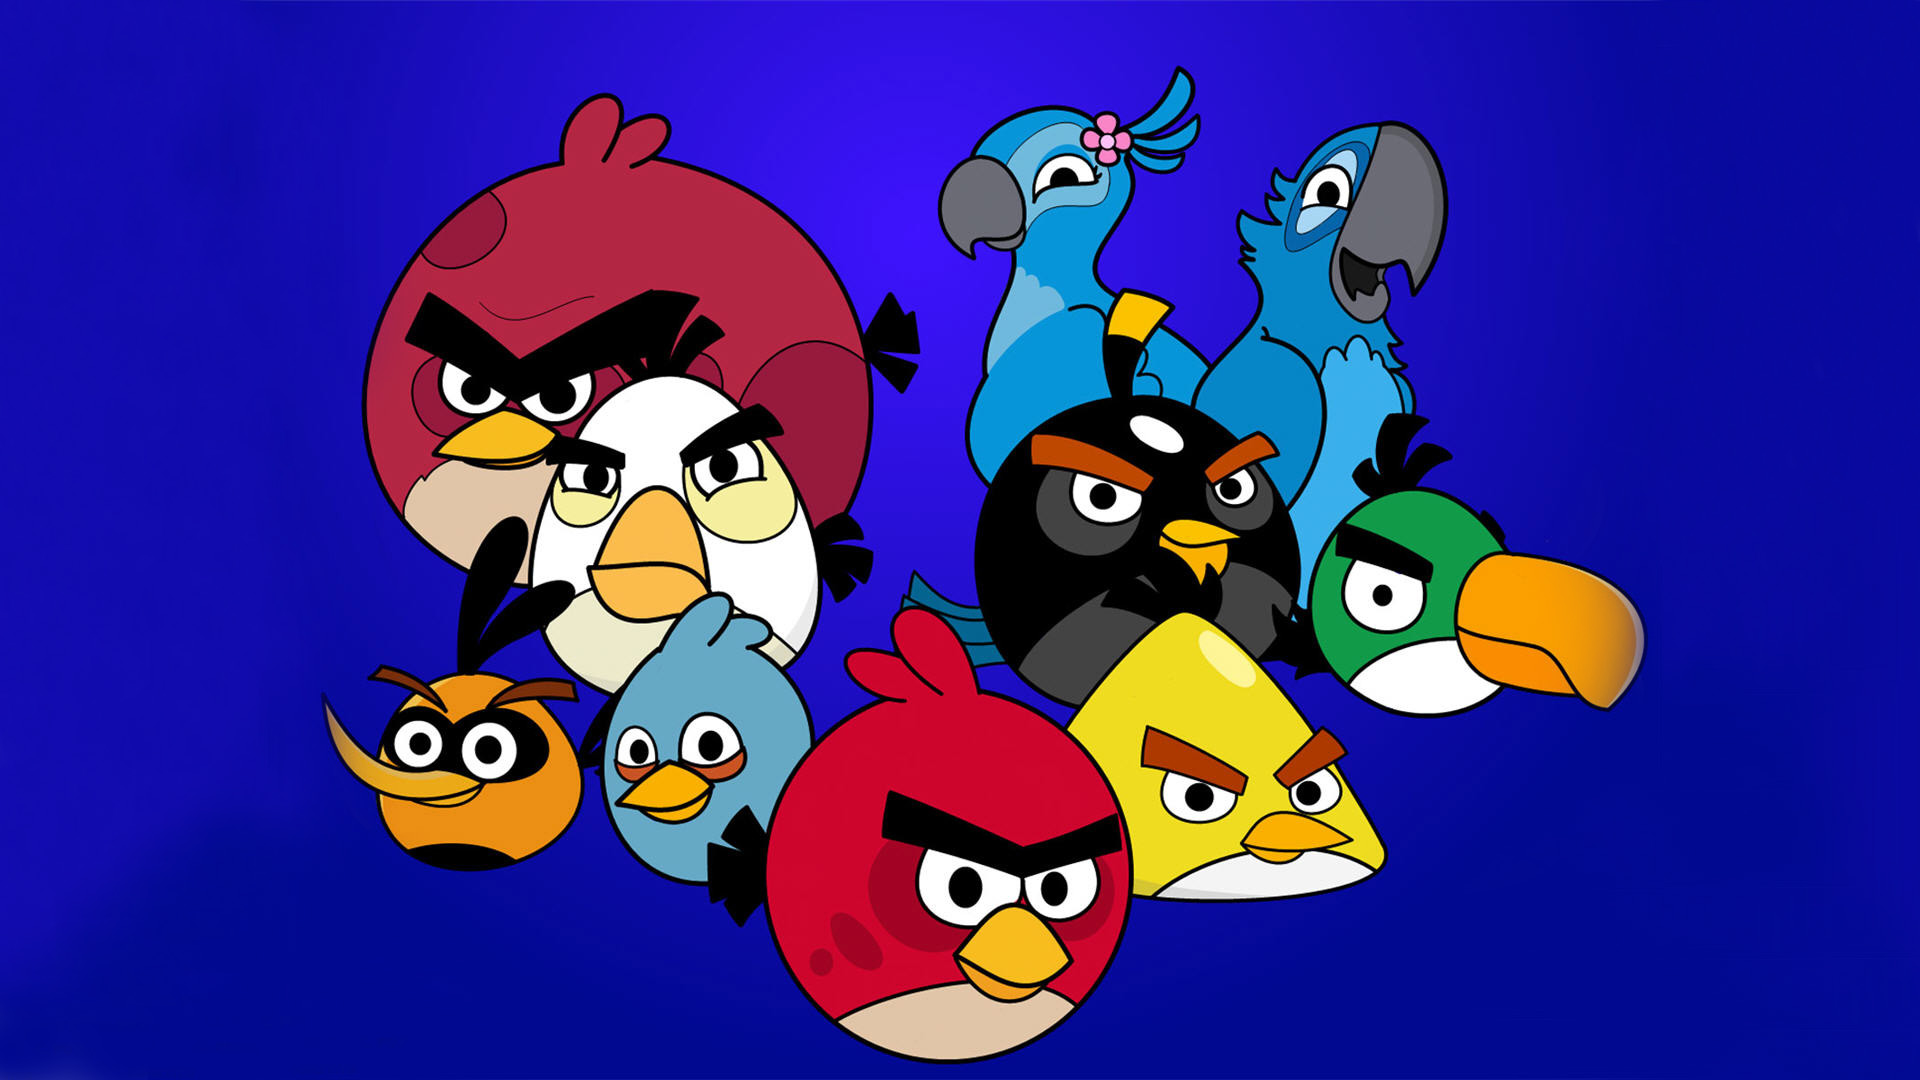 Free Download Angry Birds Wallpaper Hd 1920x1080. Download Free ...